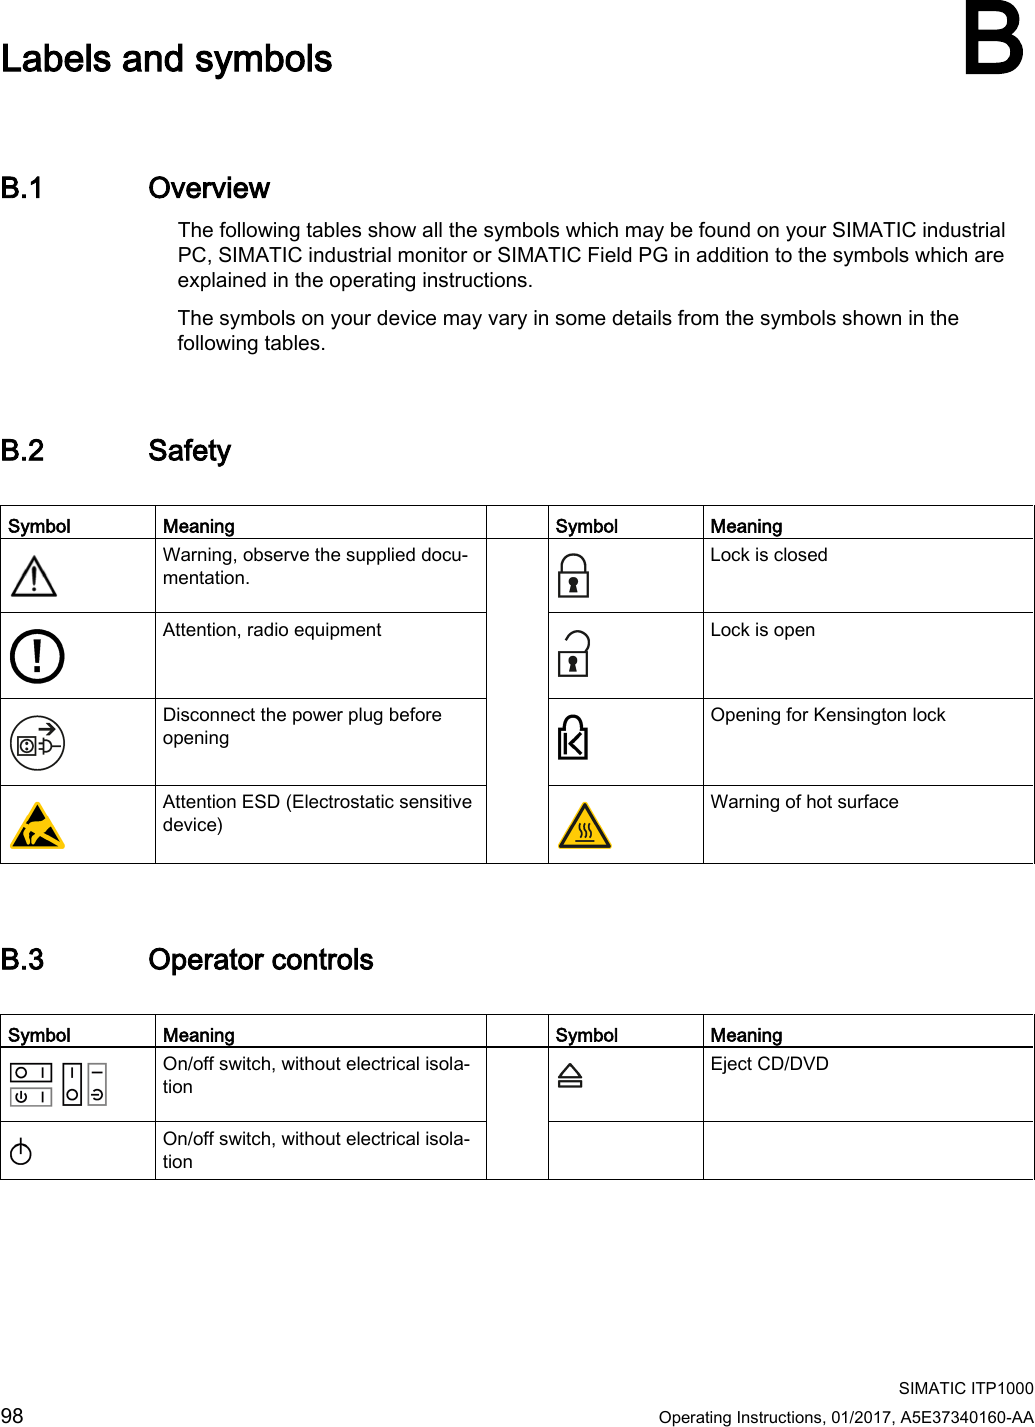    SIMATIC ITP1000 98  Operating Instructions, 01/2017, A5E37340160-AA   Labels and symbols B B.1 Overview The following tables show all the symbols which may be found on your SIMATIC industrial PC, SIMATIC industrial monitor or SIMATIC Field PG in addition to the symbols which are explained in the operating instructions. The symbols on your device may vary in some details from the symbols shown in the following tables. B.2 Safety  Symbol Meaning  Symbol Meaning  Warning, observe the supplied docu-mentation.   Lock is closed  Attention, radio equipment  Lock is open  Disconnect the power plug before opening  Opening for Kensington lock  Attention ESD (Electrostatic sensitive device)  Warning of hot surface B.3 Operator controls  Symbol Meaning  Symbol Meaning  On/off switch, without electrical isola-tion   Eject CD/DVD  On/off switch, without electrical isola-tion    